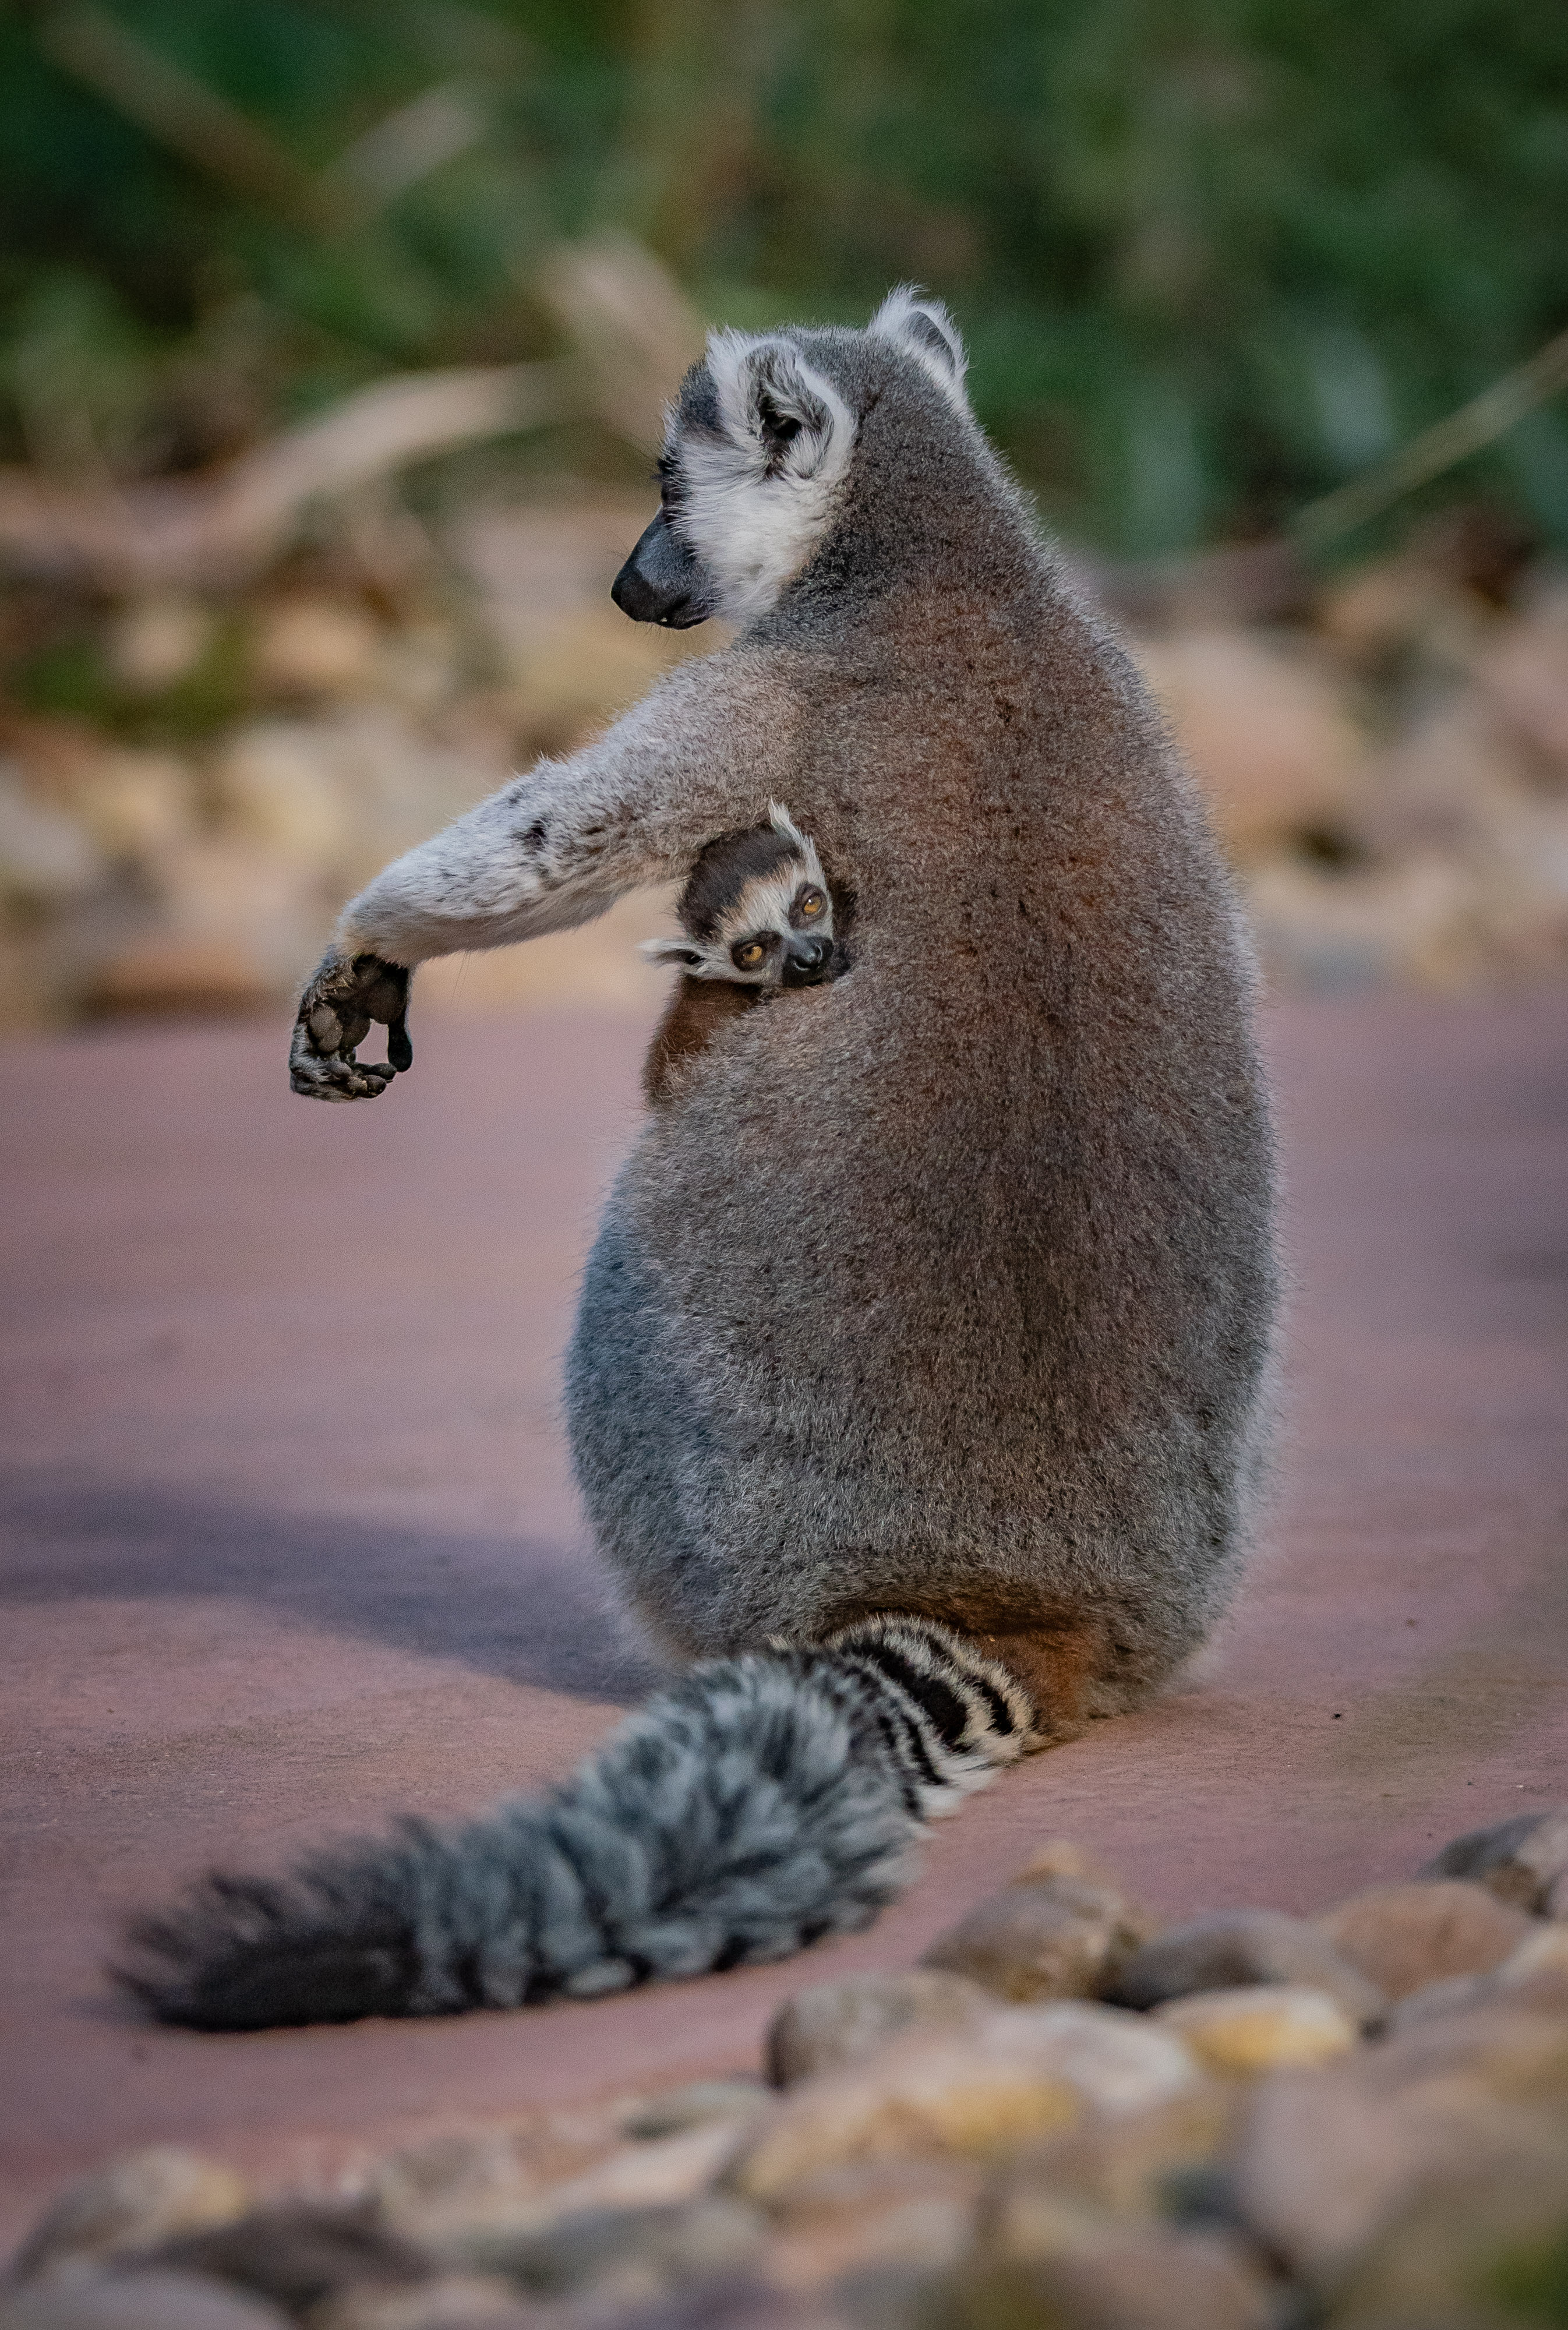 A baby ring-tailed lemur clings to its mum